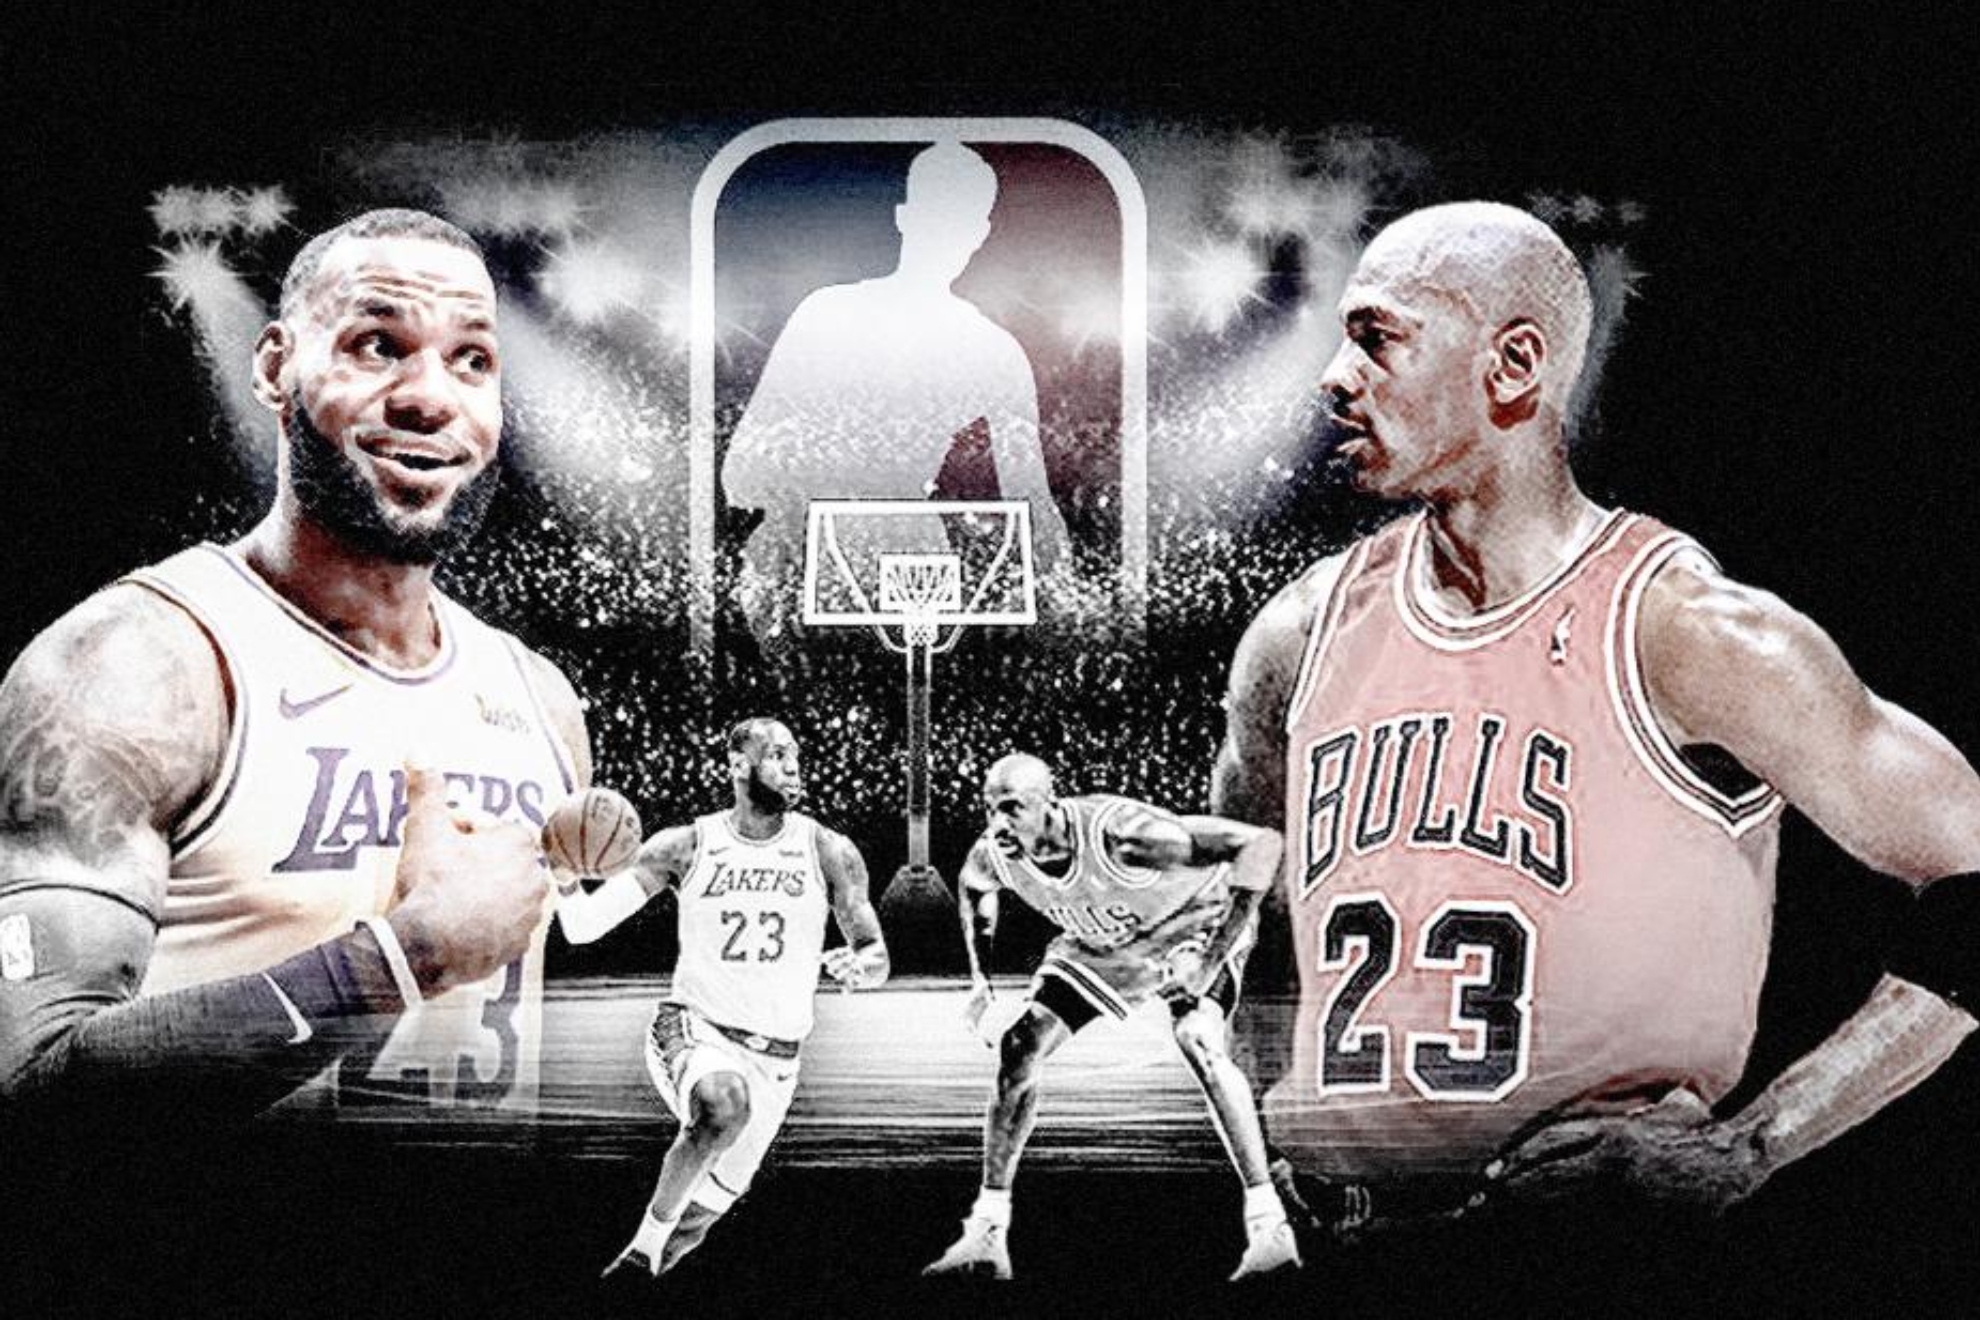 The best player and starting five in NBA history according to Artificial Intelligence